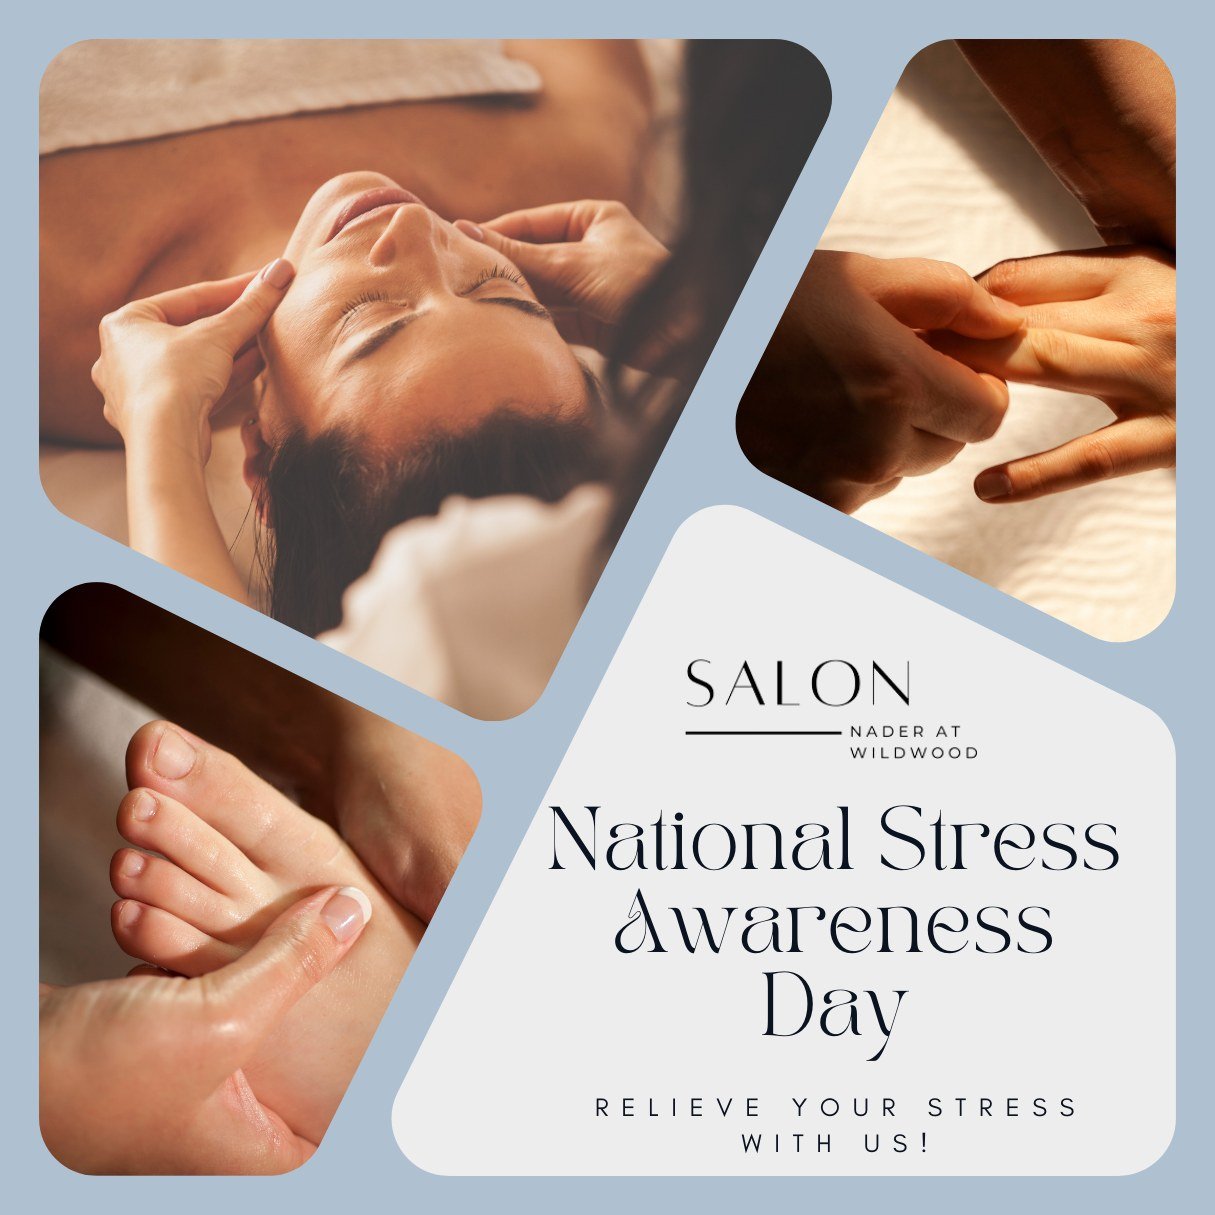 It's National Stress Awareness Day! Lower your stress levels with one of our several relaxing services! Call today for your appointment!

#salonnaderatwildwood #salonnader #bethesdahairsalon #spring #facials #facialskincare #spa #manicures #pedicure?